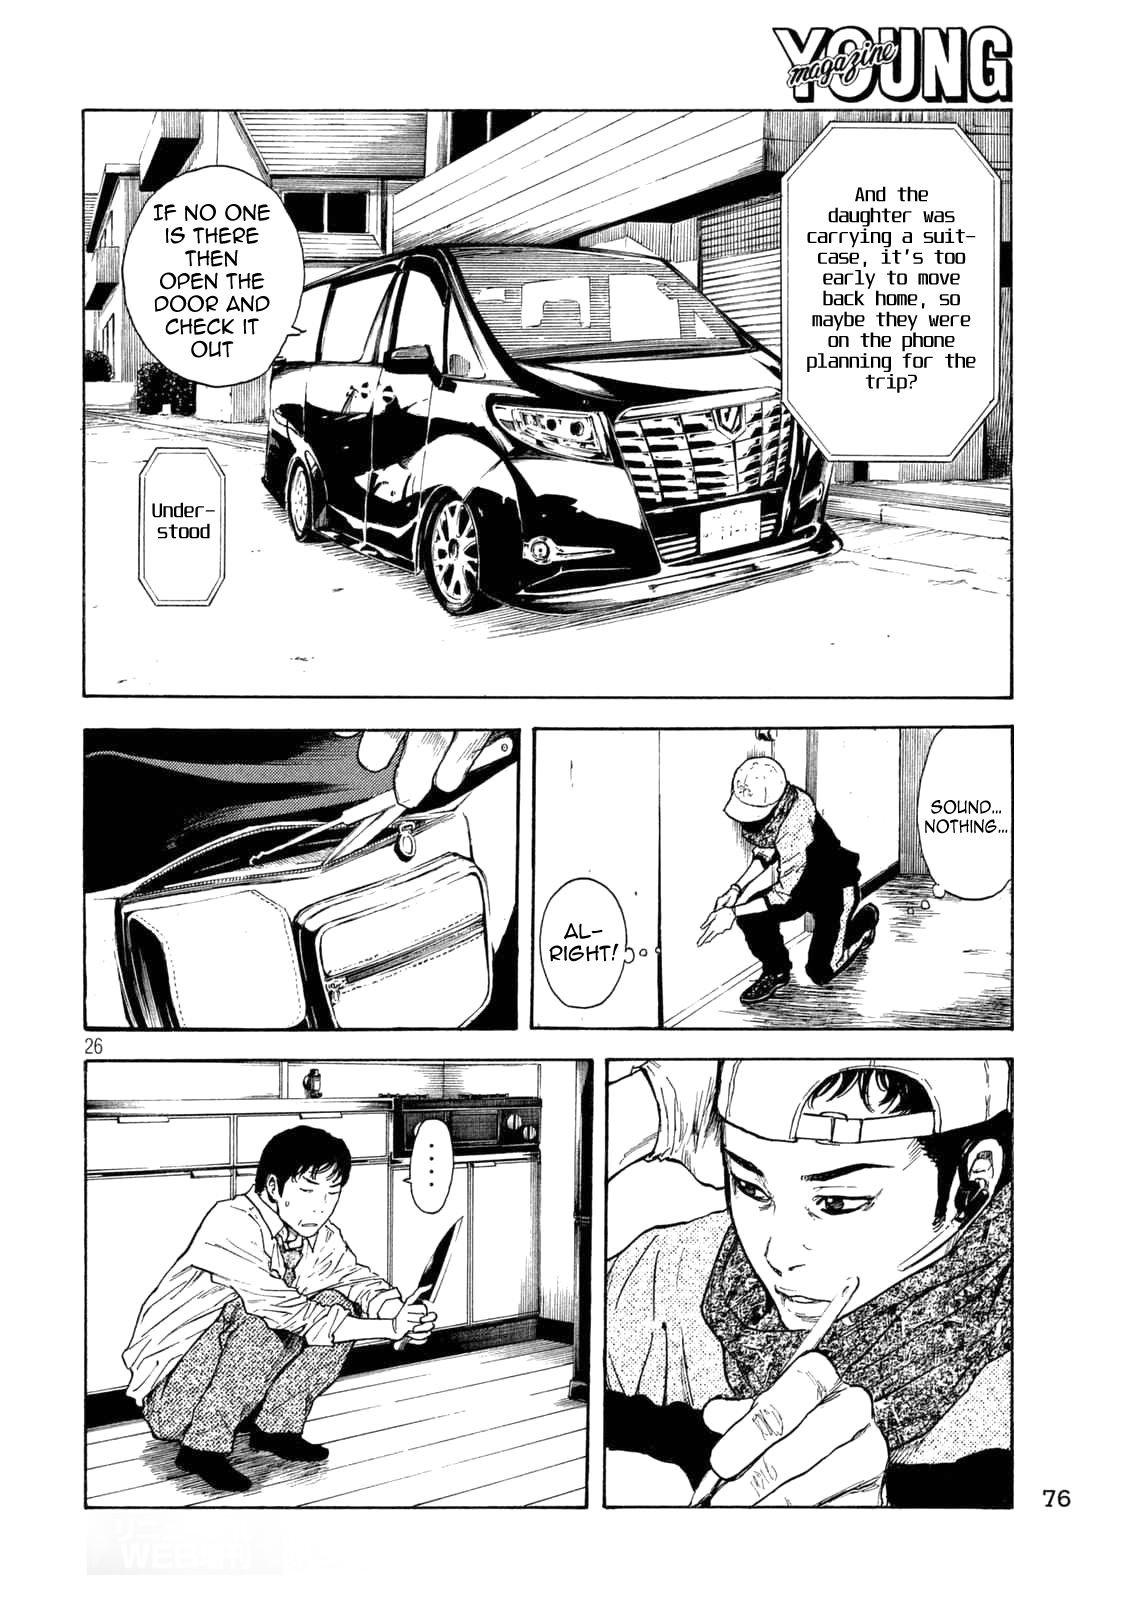 My Home Hero Vol. 1 Ch. 2 My Wife Was The First To Arrive At The Scene of The Crime